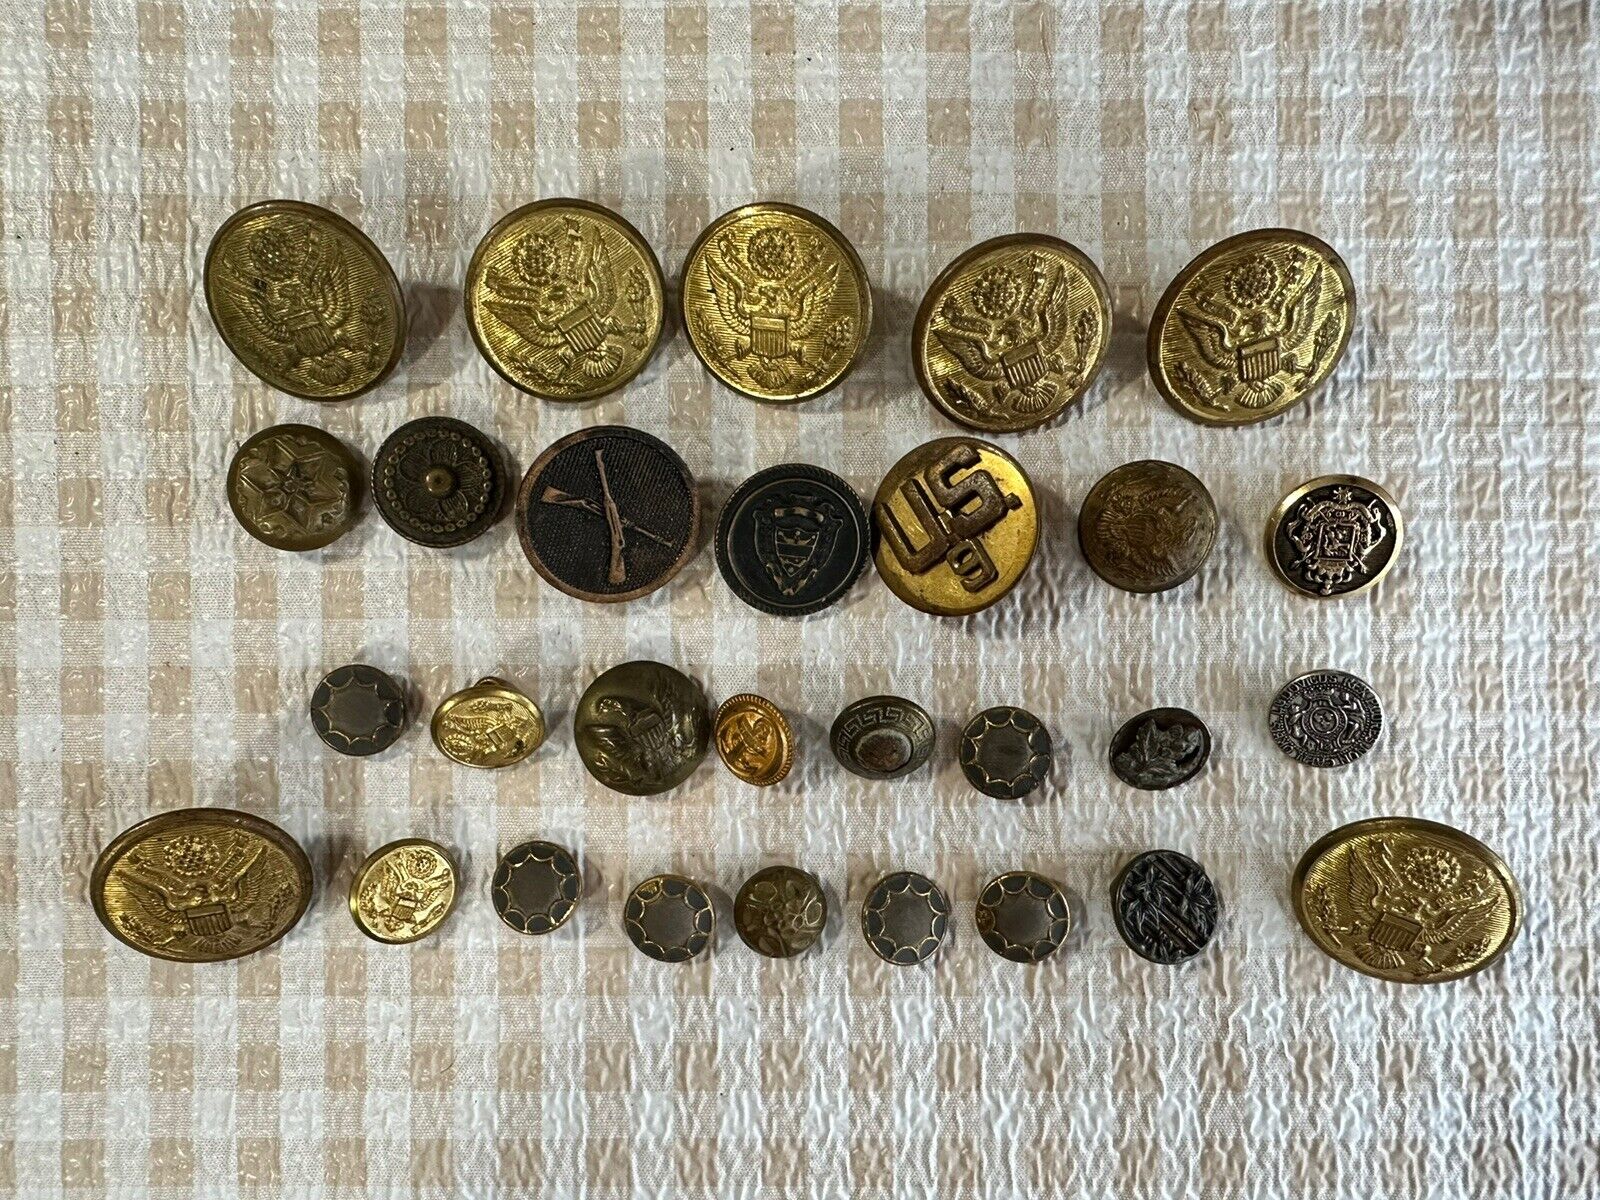 Vintage military buttons lot from different decades and makers